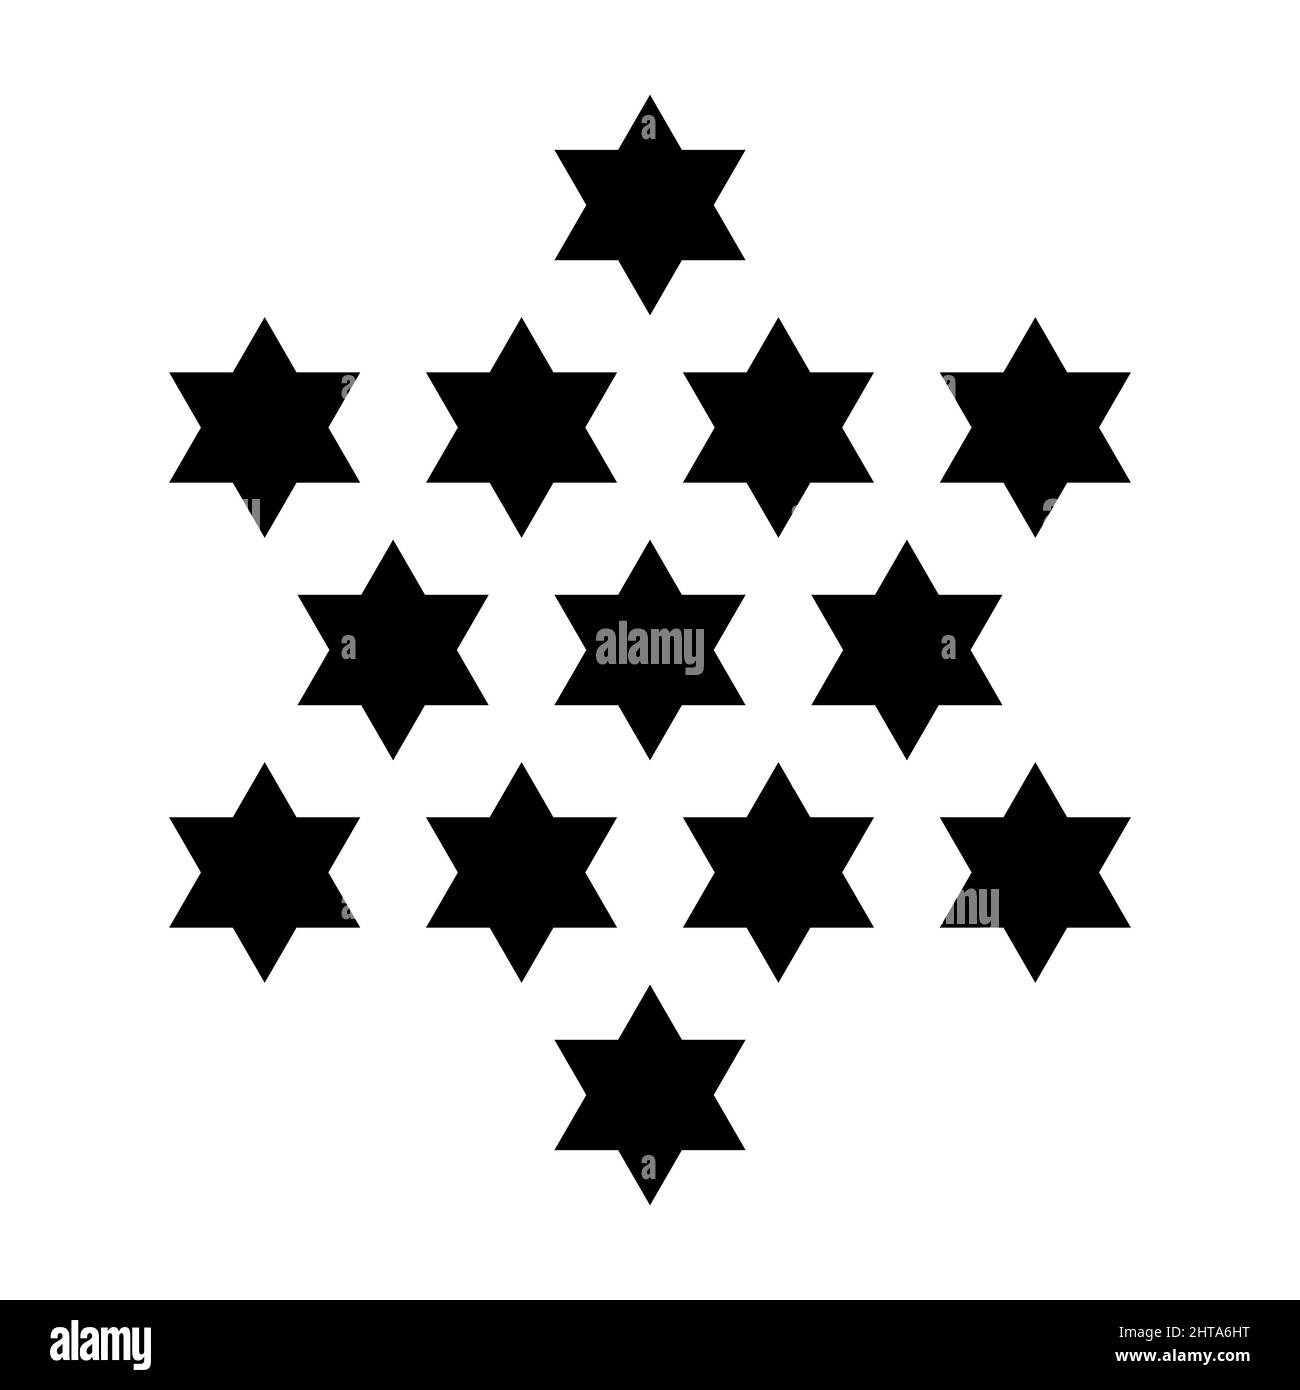 Thirteen stars. 13 hexagrams forming a centered, six-pointed star, such as the Star of David. Symbol, used in the Great Seal of the USA. Stock Photo